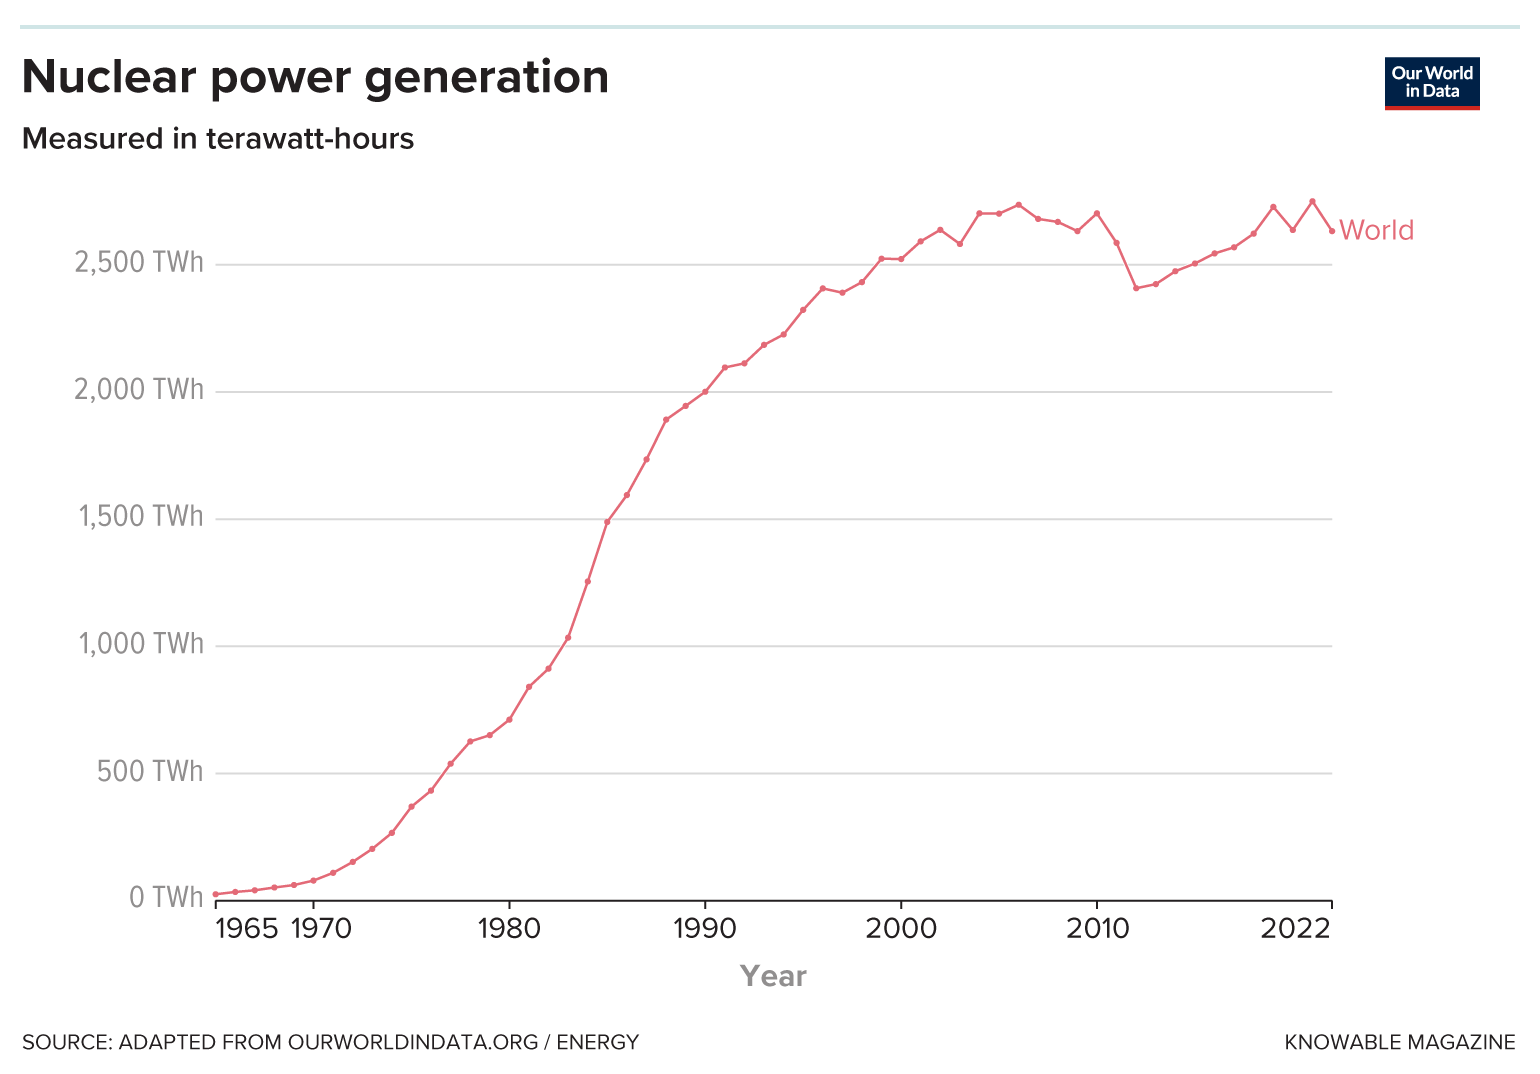 Nuclear power generation grew rapidly through the last few decades of the 20th century, then leveled off. It may be poised for another big increase.